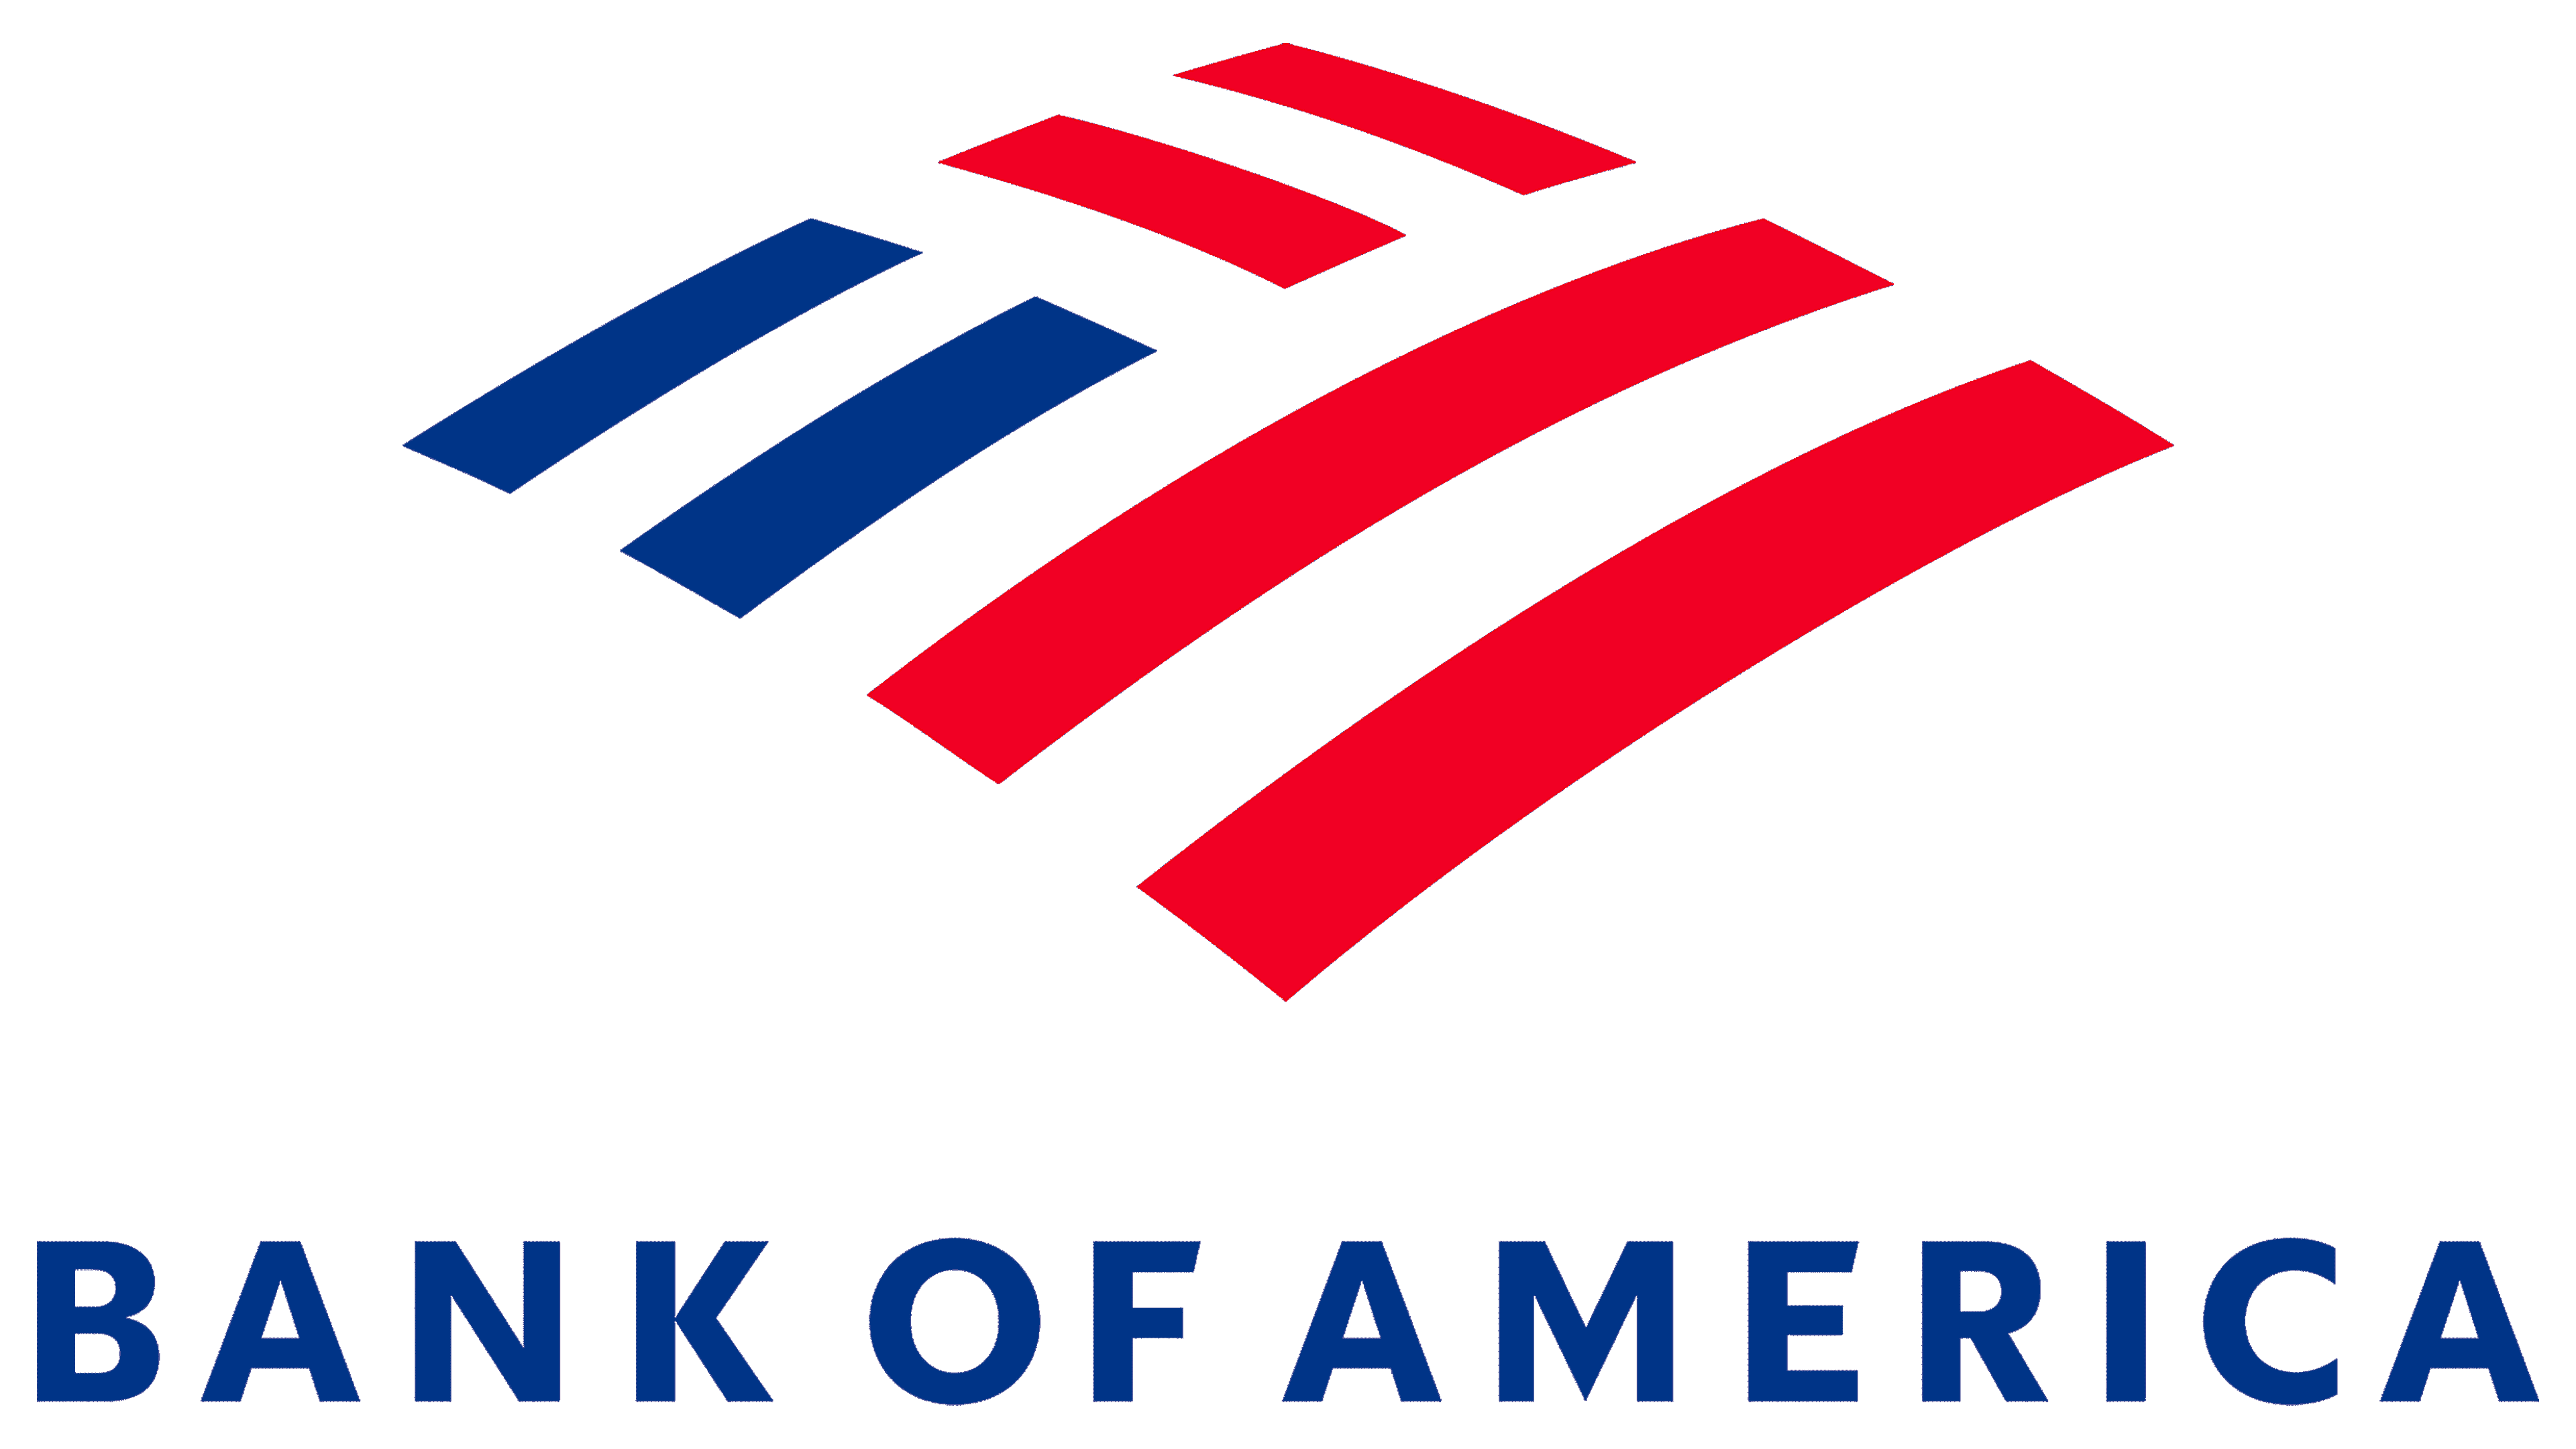 Bank of America Logo and sign, new logo meaning and history, PNG, SVG